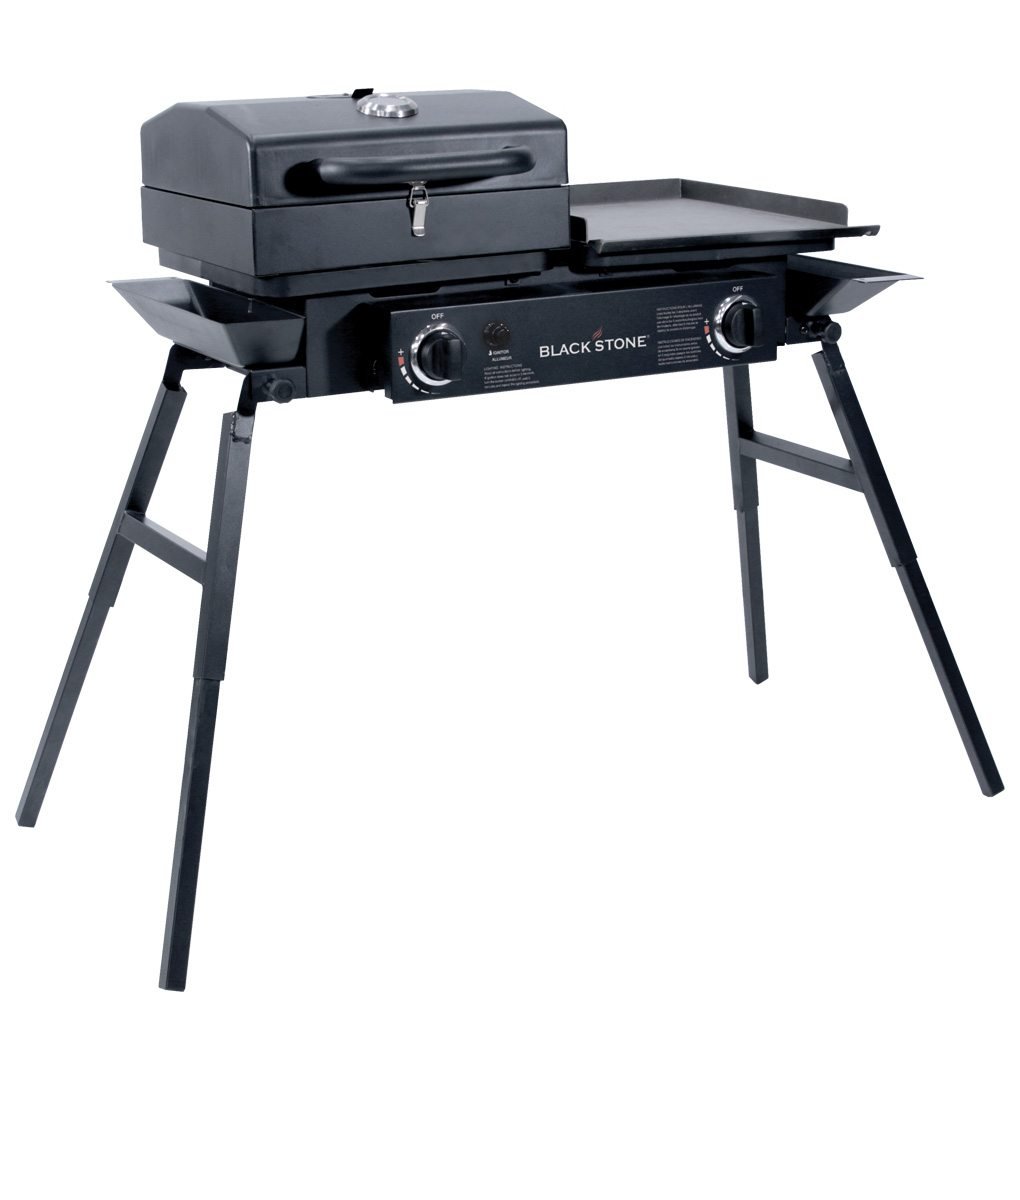 Blackstone Grills Tailgater - Portable Gas Grill and Griddle Combo